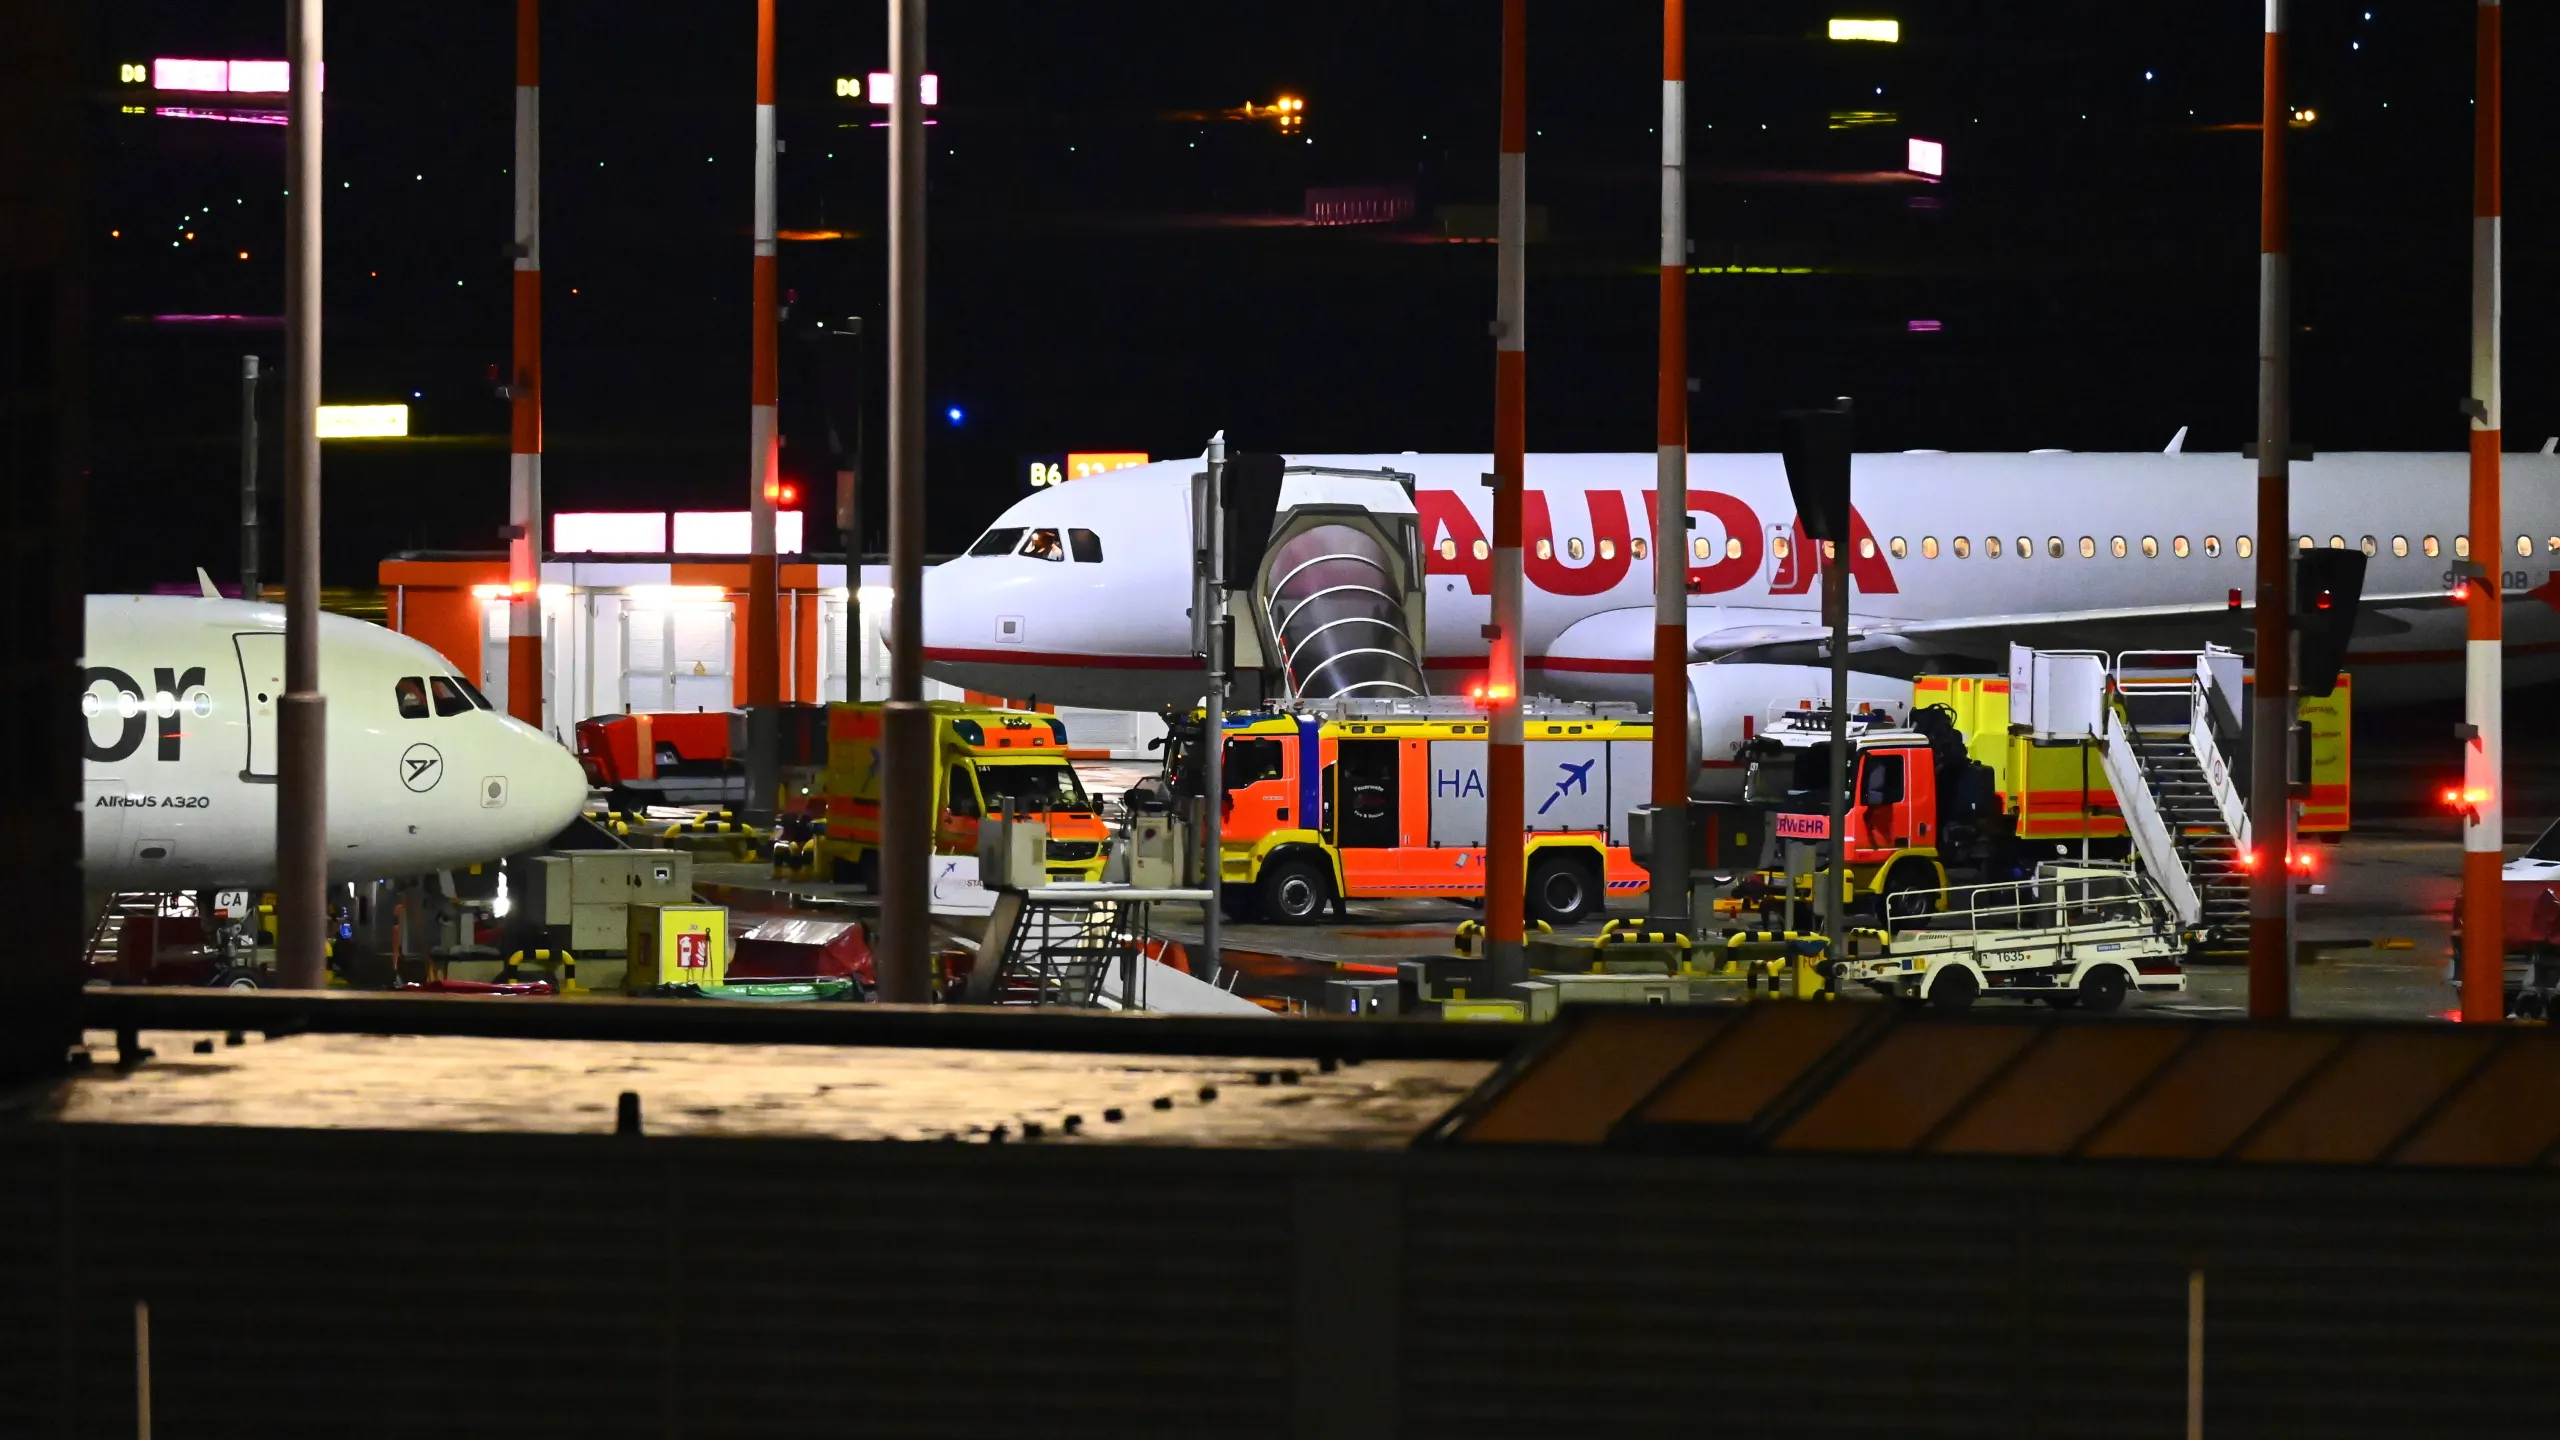 German Airport Shut Down After Armed Man Breached Security